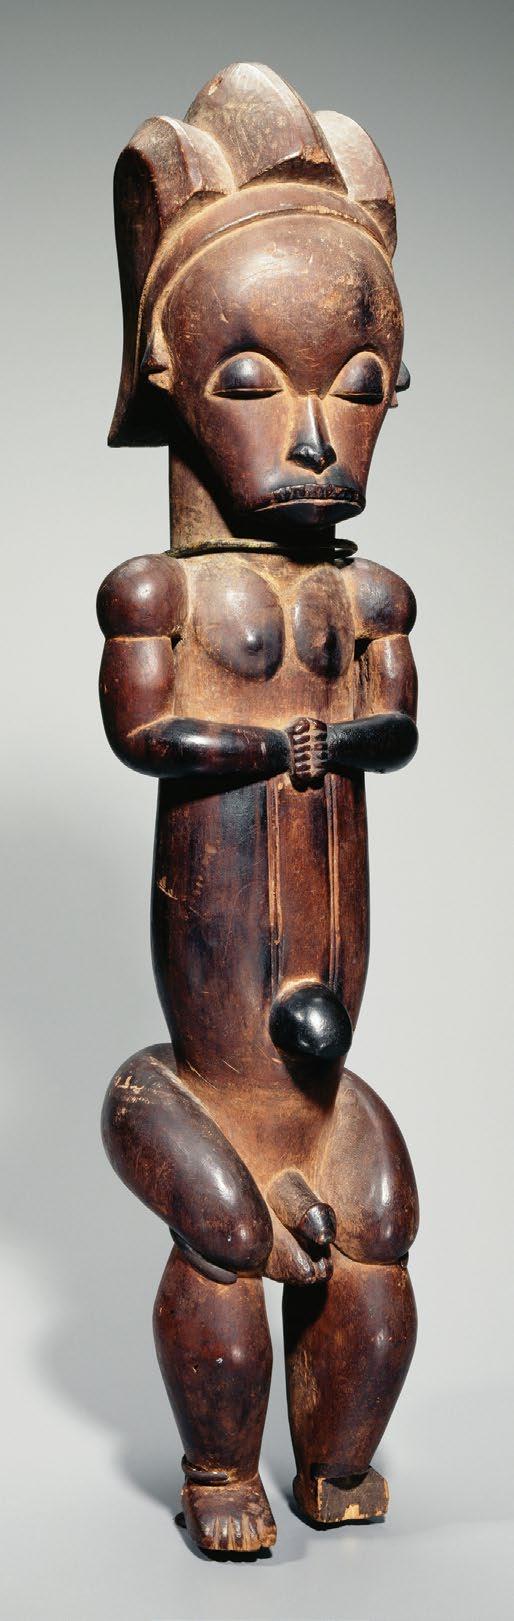 179. Reliquary figure (byeri). Fang peoples (southern Cameroon). c. 19th to 20th century C.E. Wood.